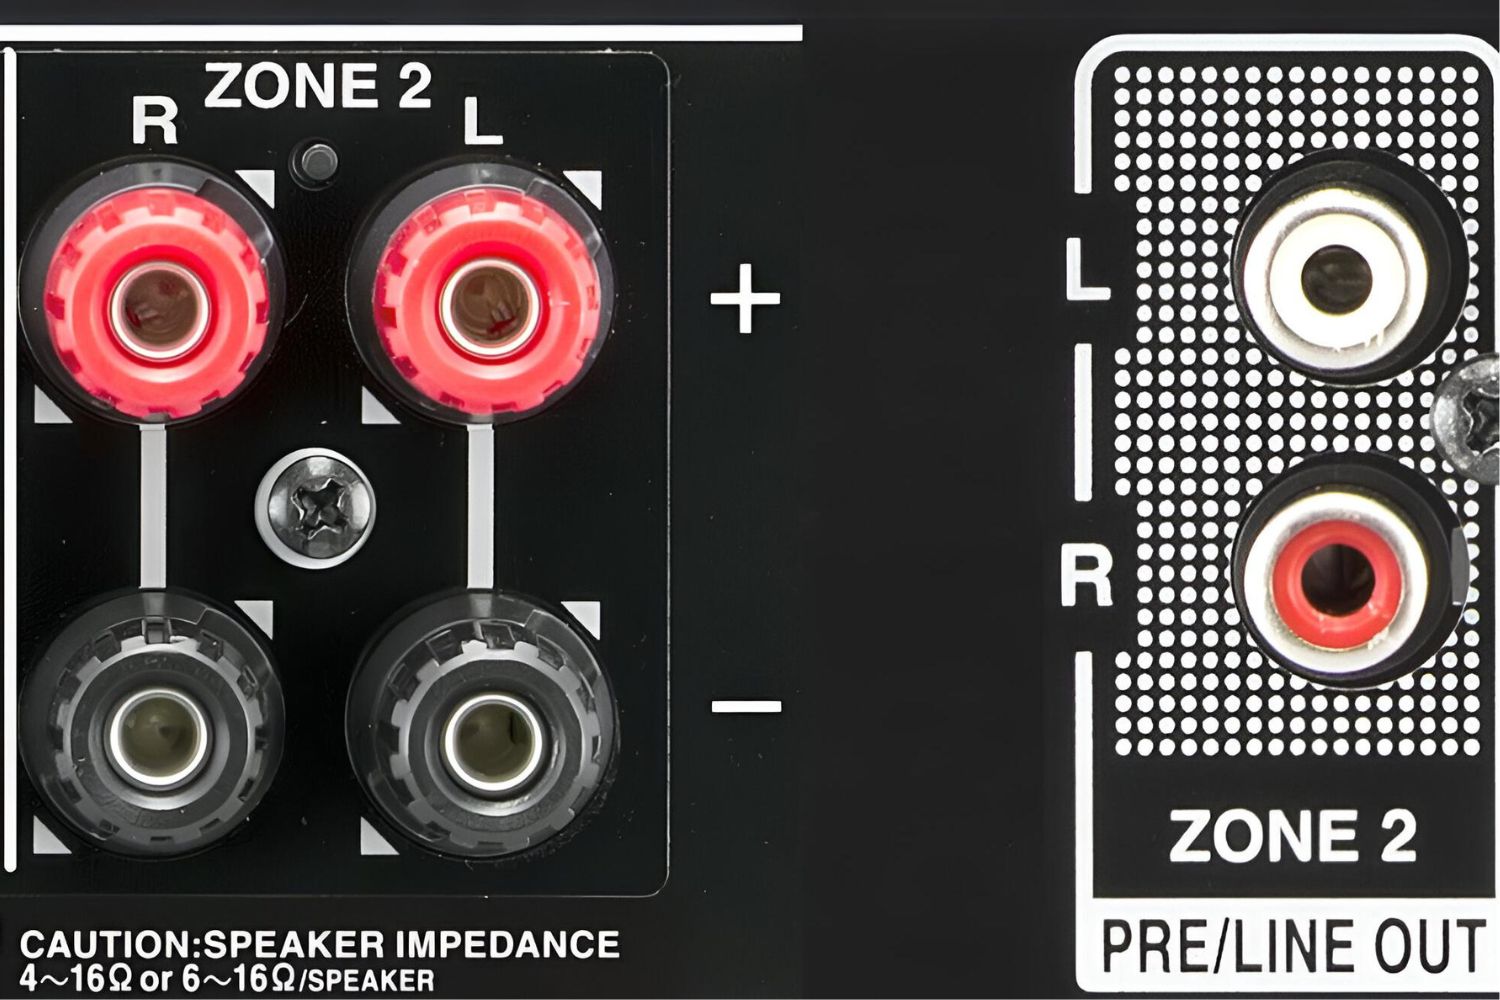 what-is-zone-2-on-an-av-receiver